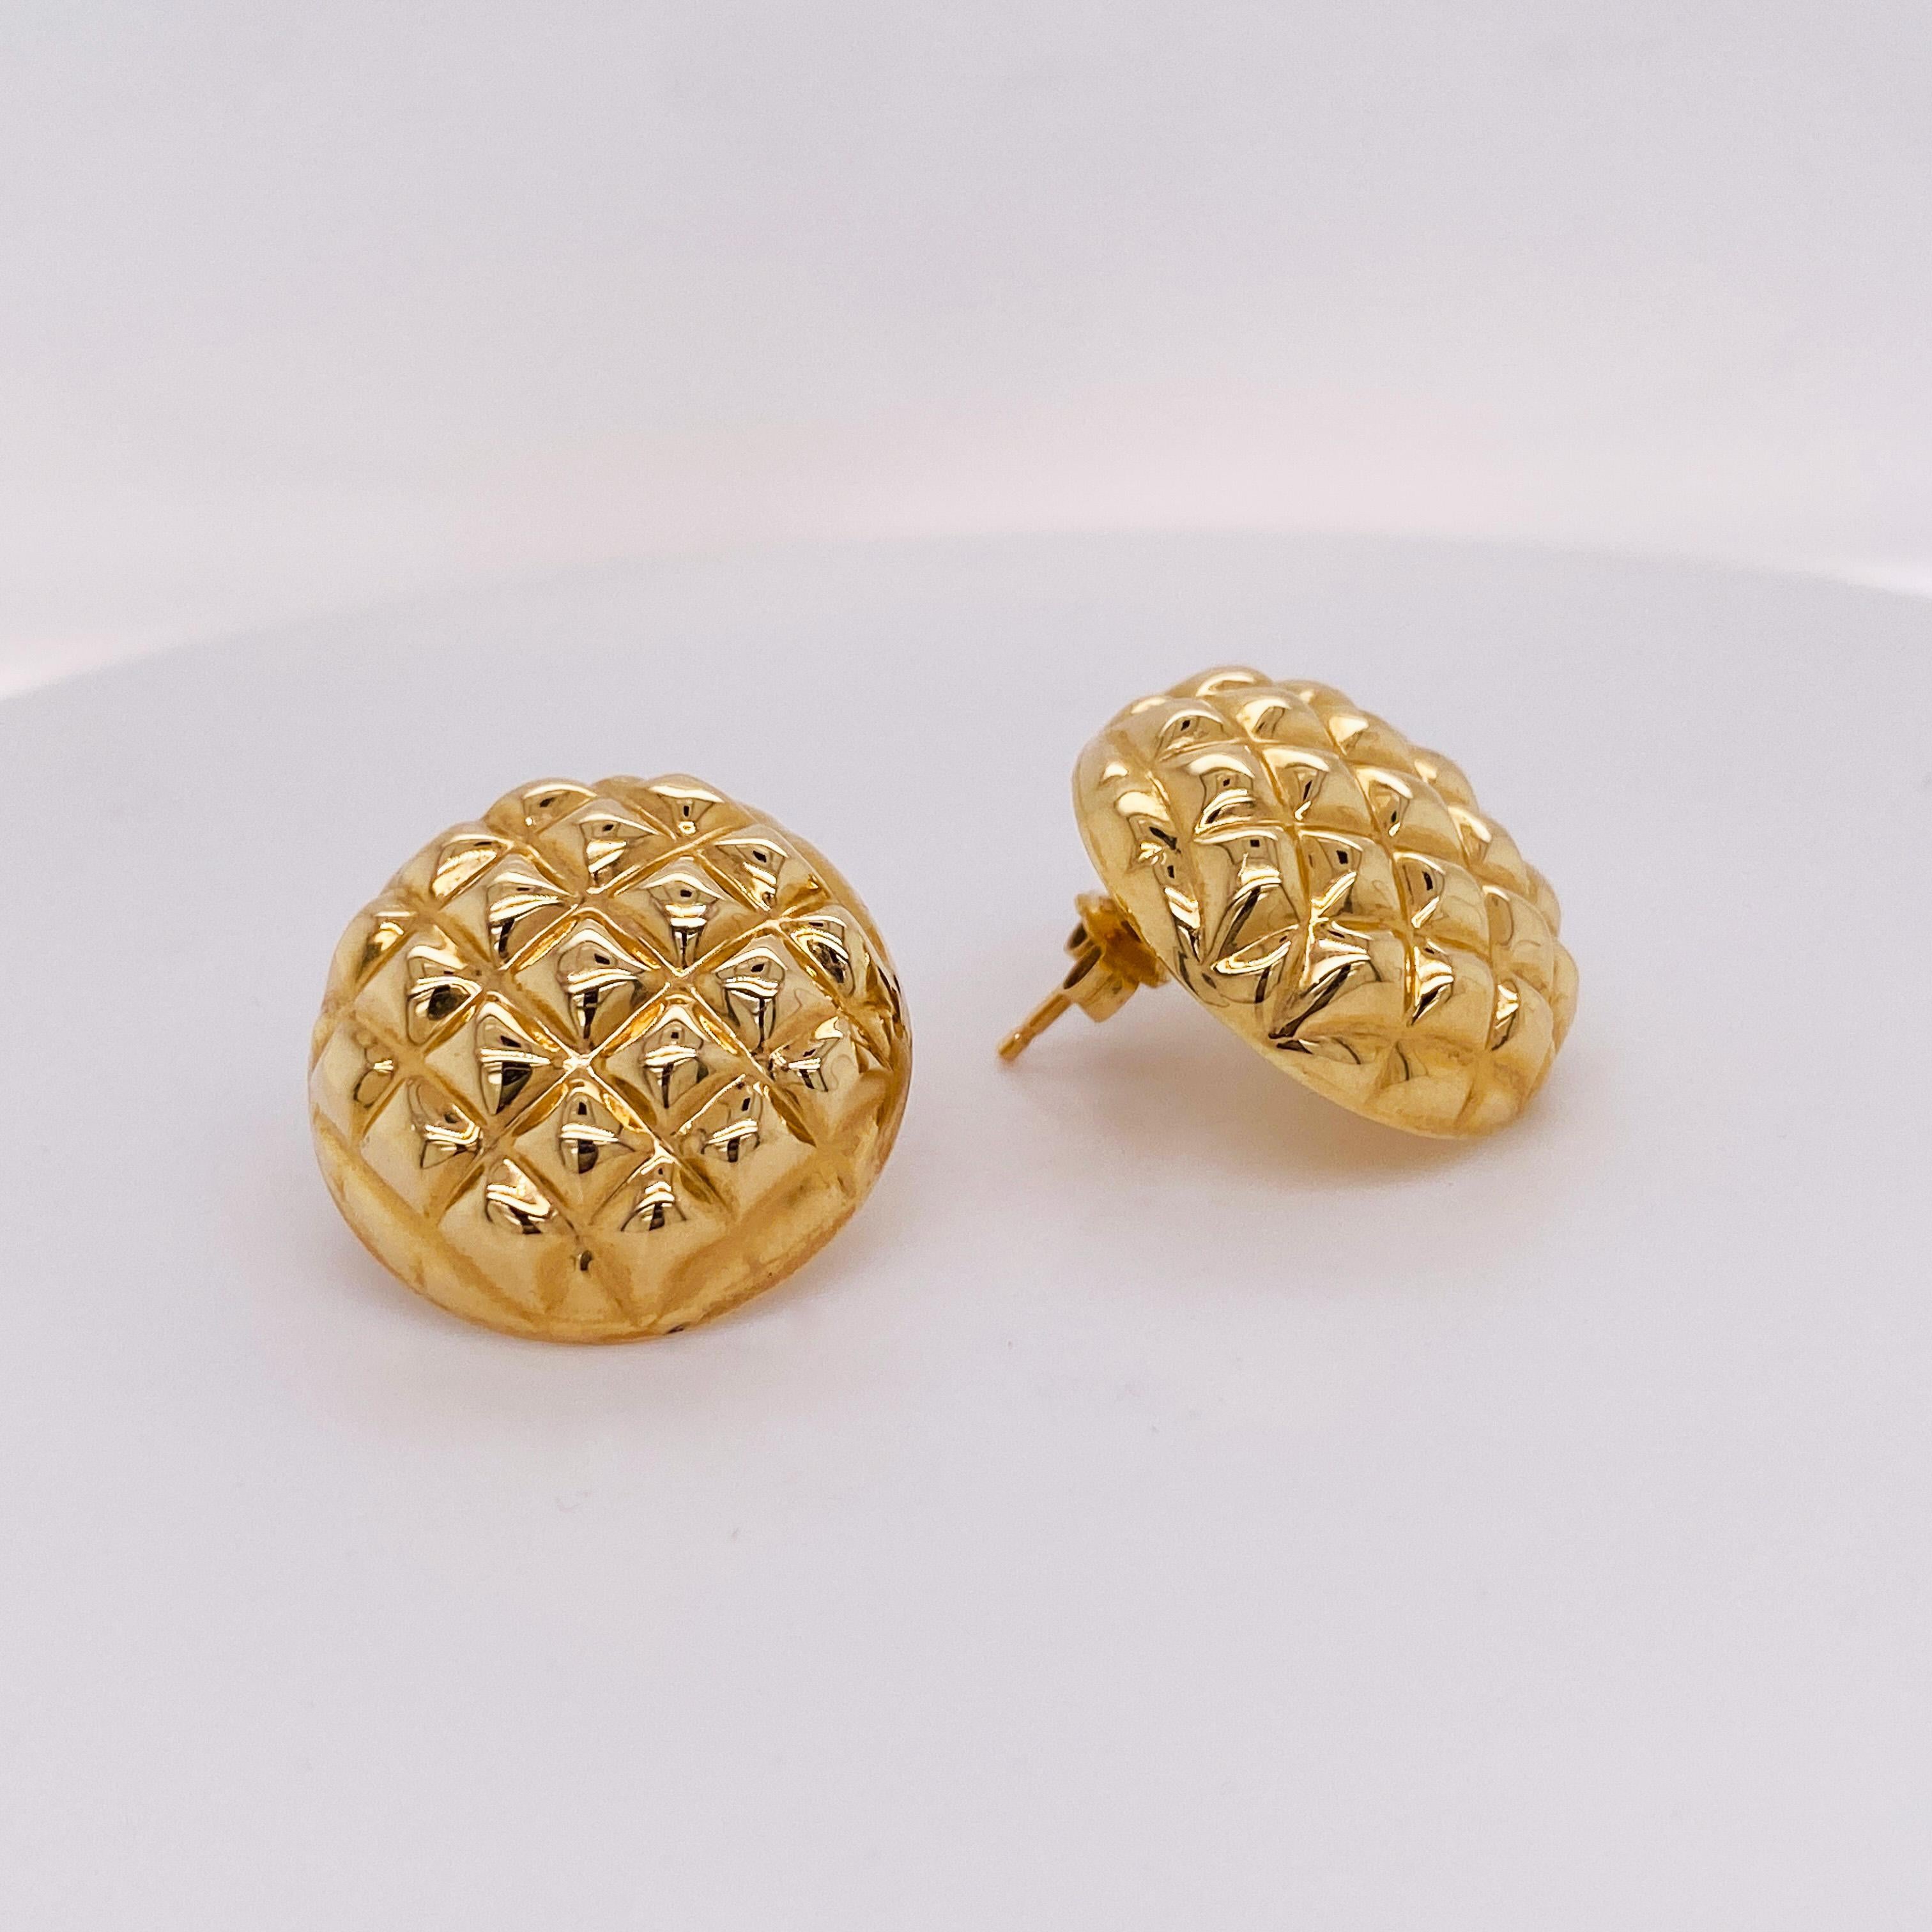 These yellow-gold checkerboard studs are lightweight and easy to wear. These make a great go-to accessory as they are lightweight and chic. The yellow gold goes with everything and stands out against all hair colors. Gold knot earrings are a staple